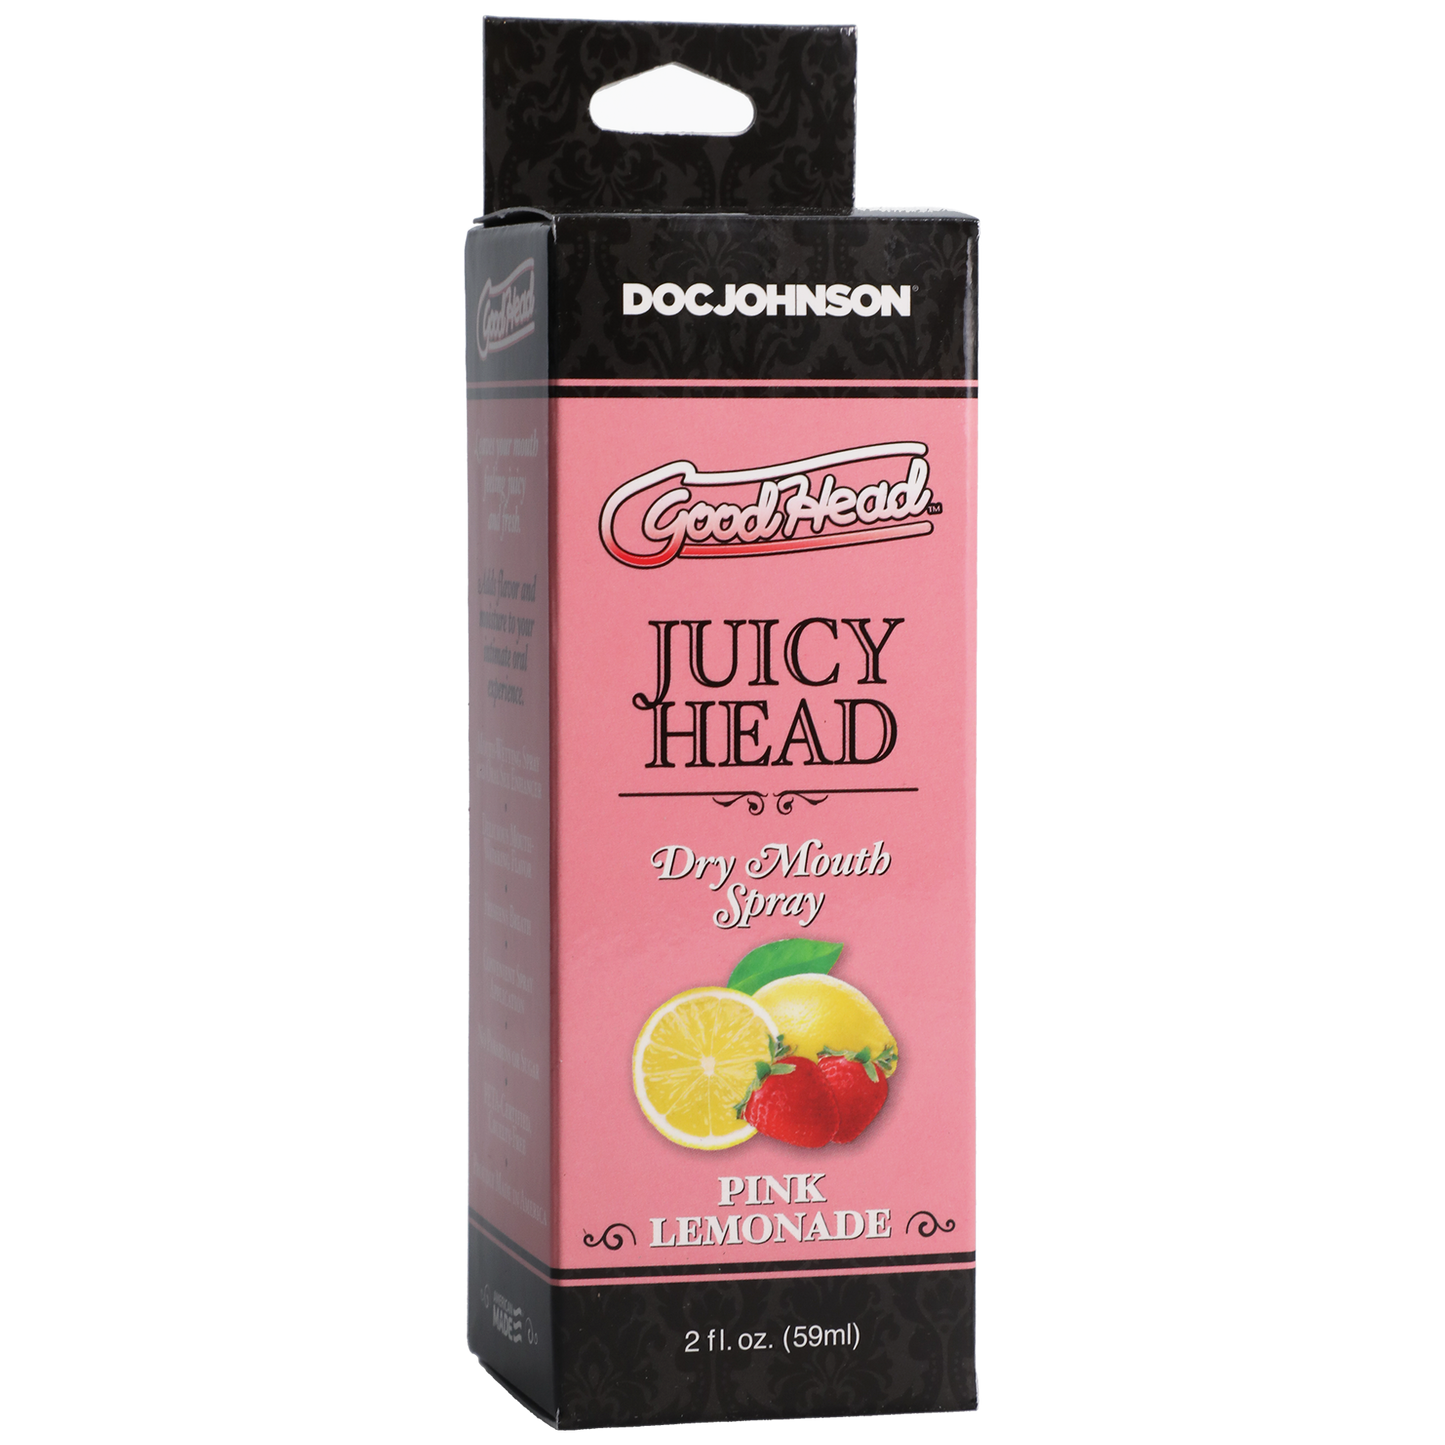 Photo of the package for the GoodHead Juicy Head from Doc Johnson (pink lemonade).